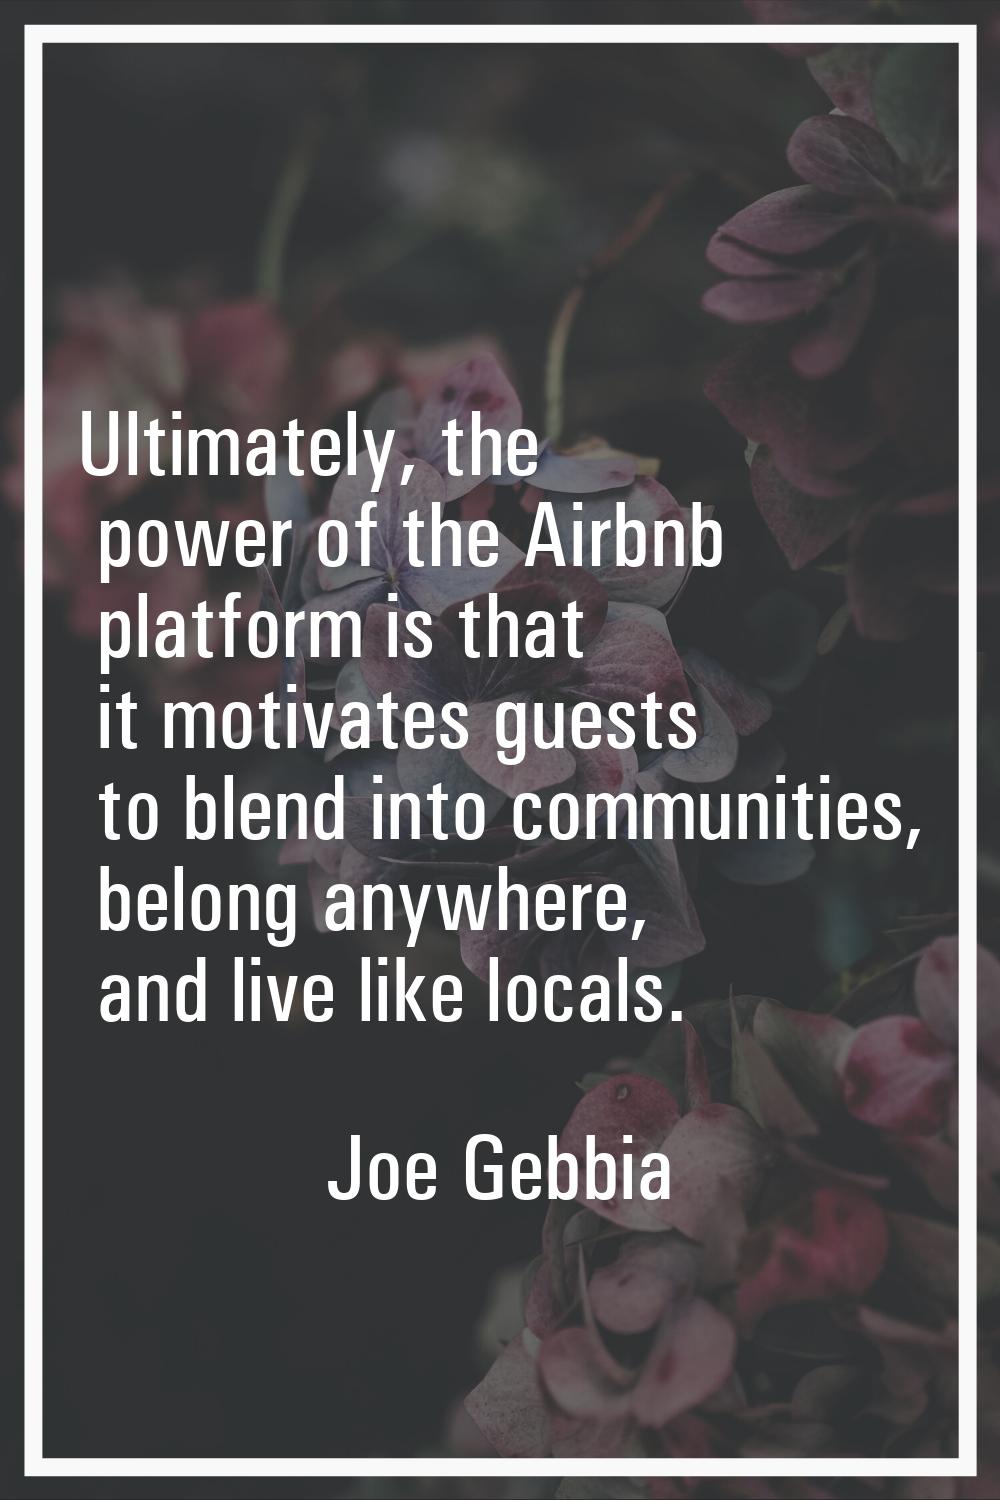 Ultimately, the power of the Airbnb platform is that it motivates guests to blend into communities,